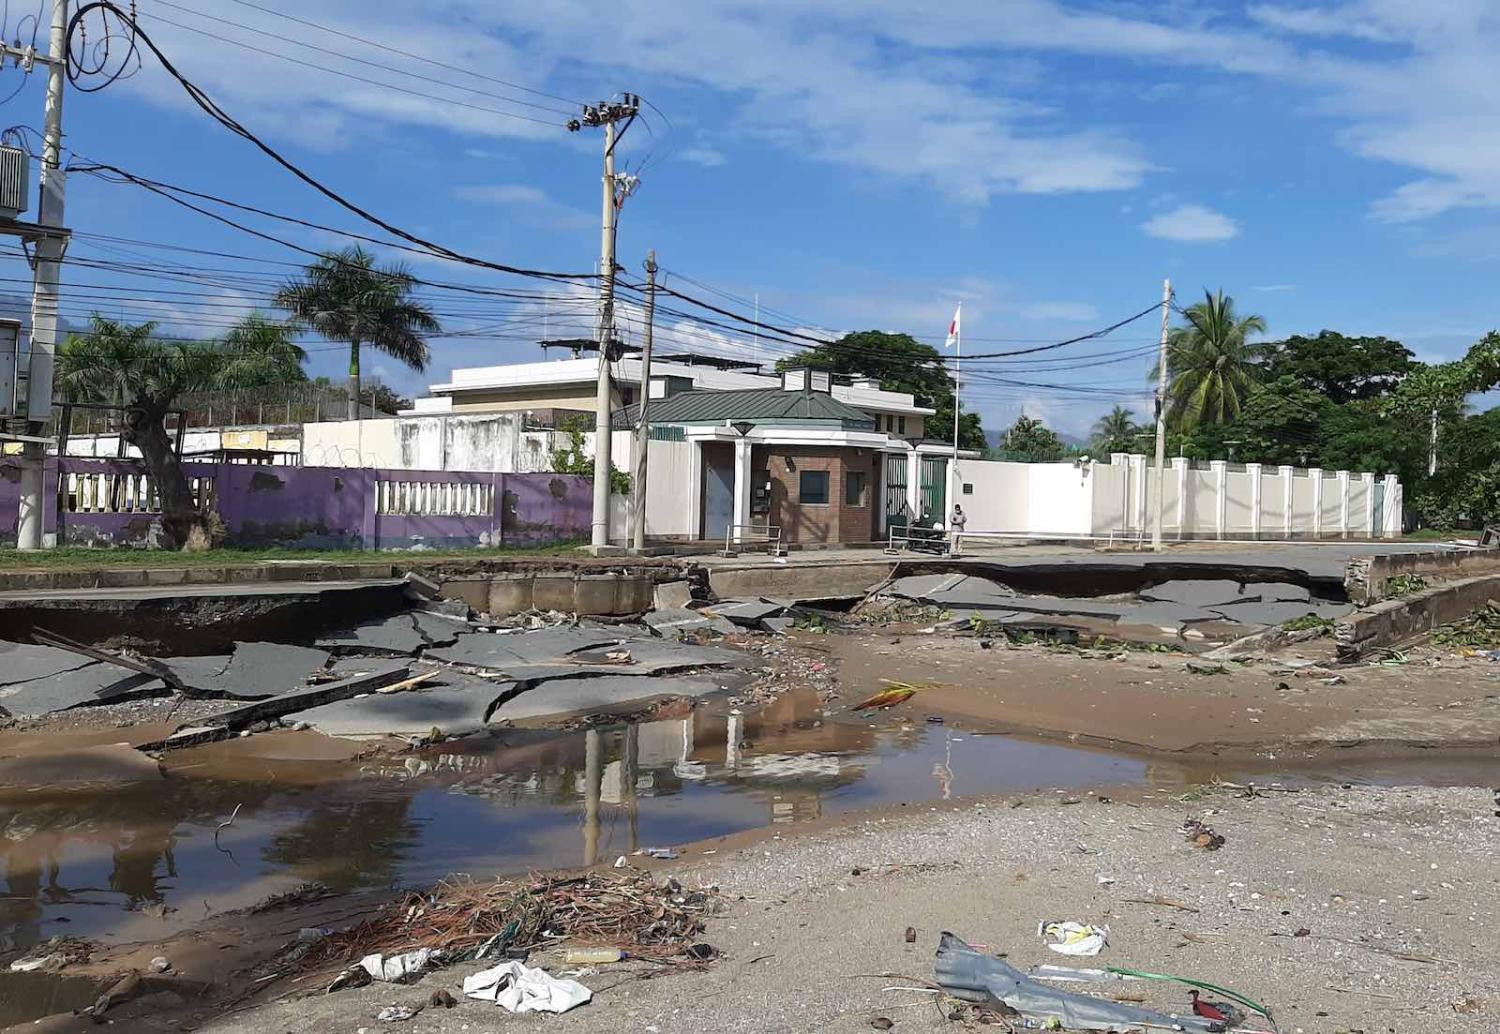 Collapsed road in front of the Embassy of Japan in Dili after recent floods (Author provided)